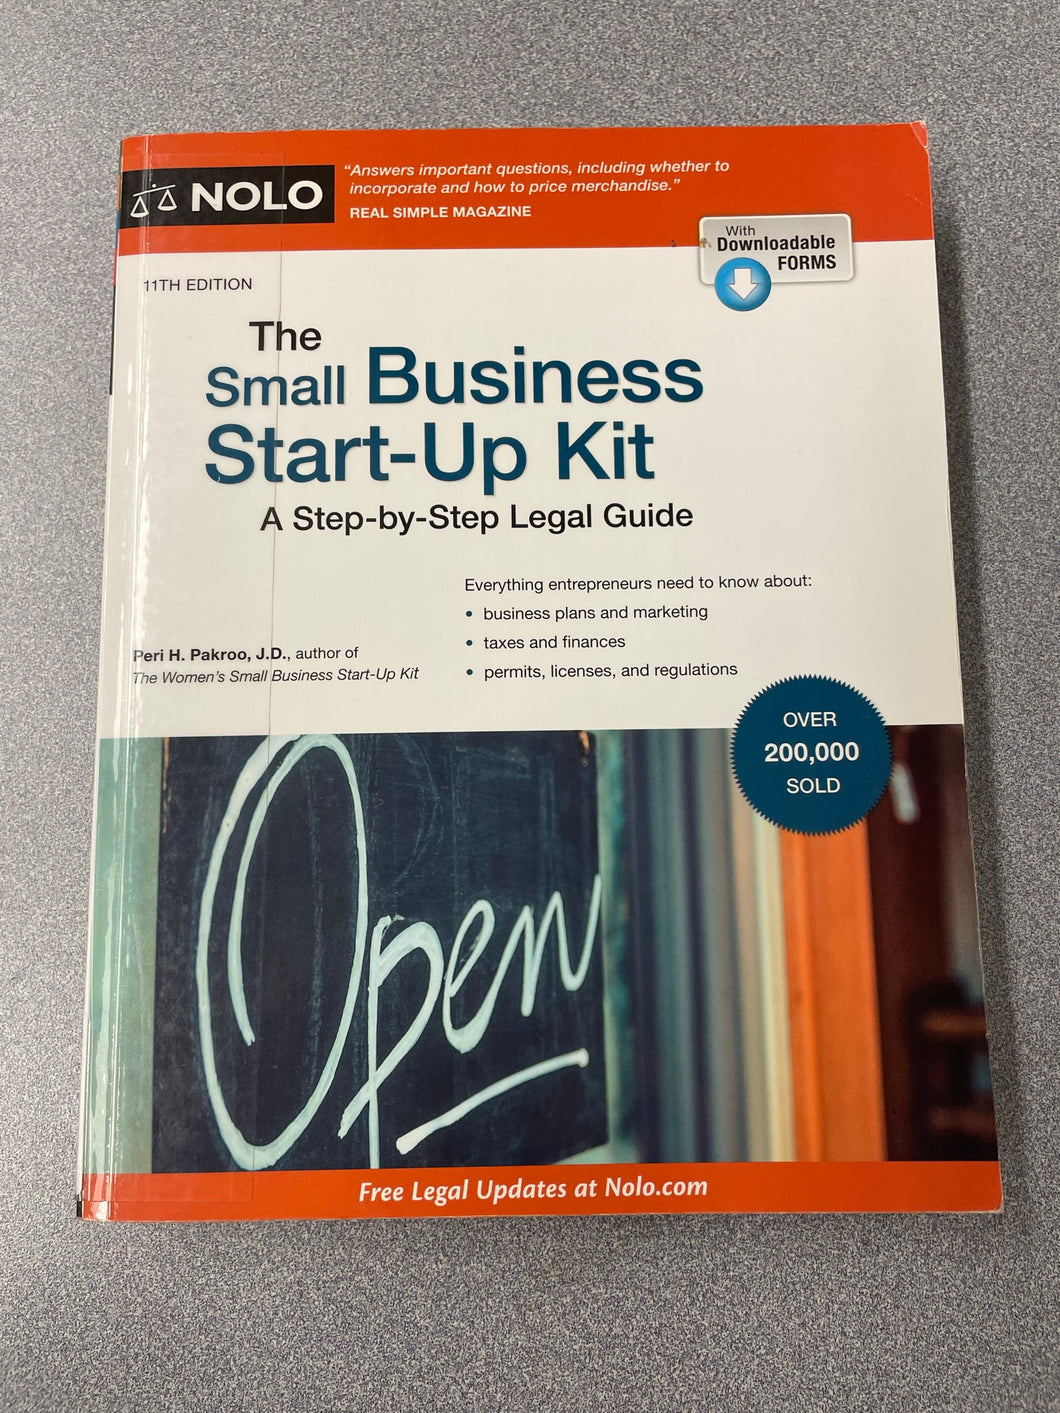 The Small Business Start-Up Kit: a Step-by-Step Legal Guide, Pakroo, Peri H. [2020] LAW 10/22